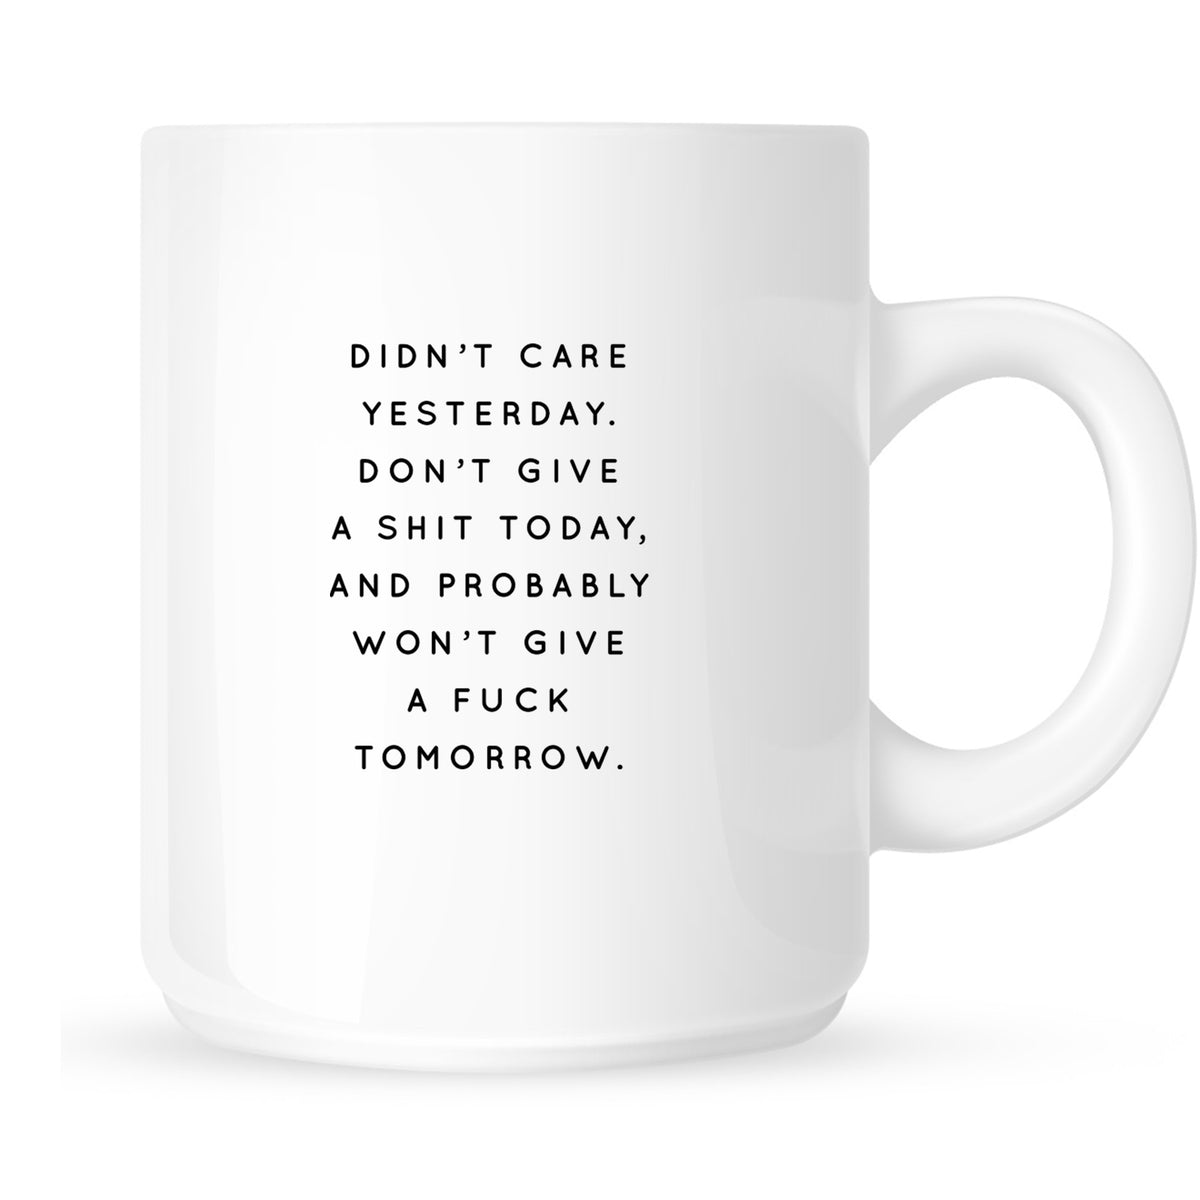 Mug - Didn't Care Yesterday, Don't Give a Shit Today, and Probably Won't Give a Fuck Tomorrow